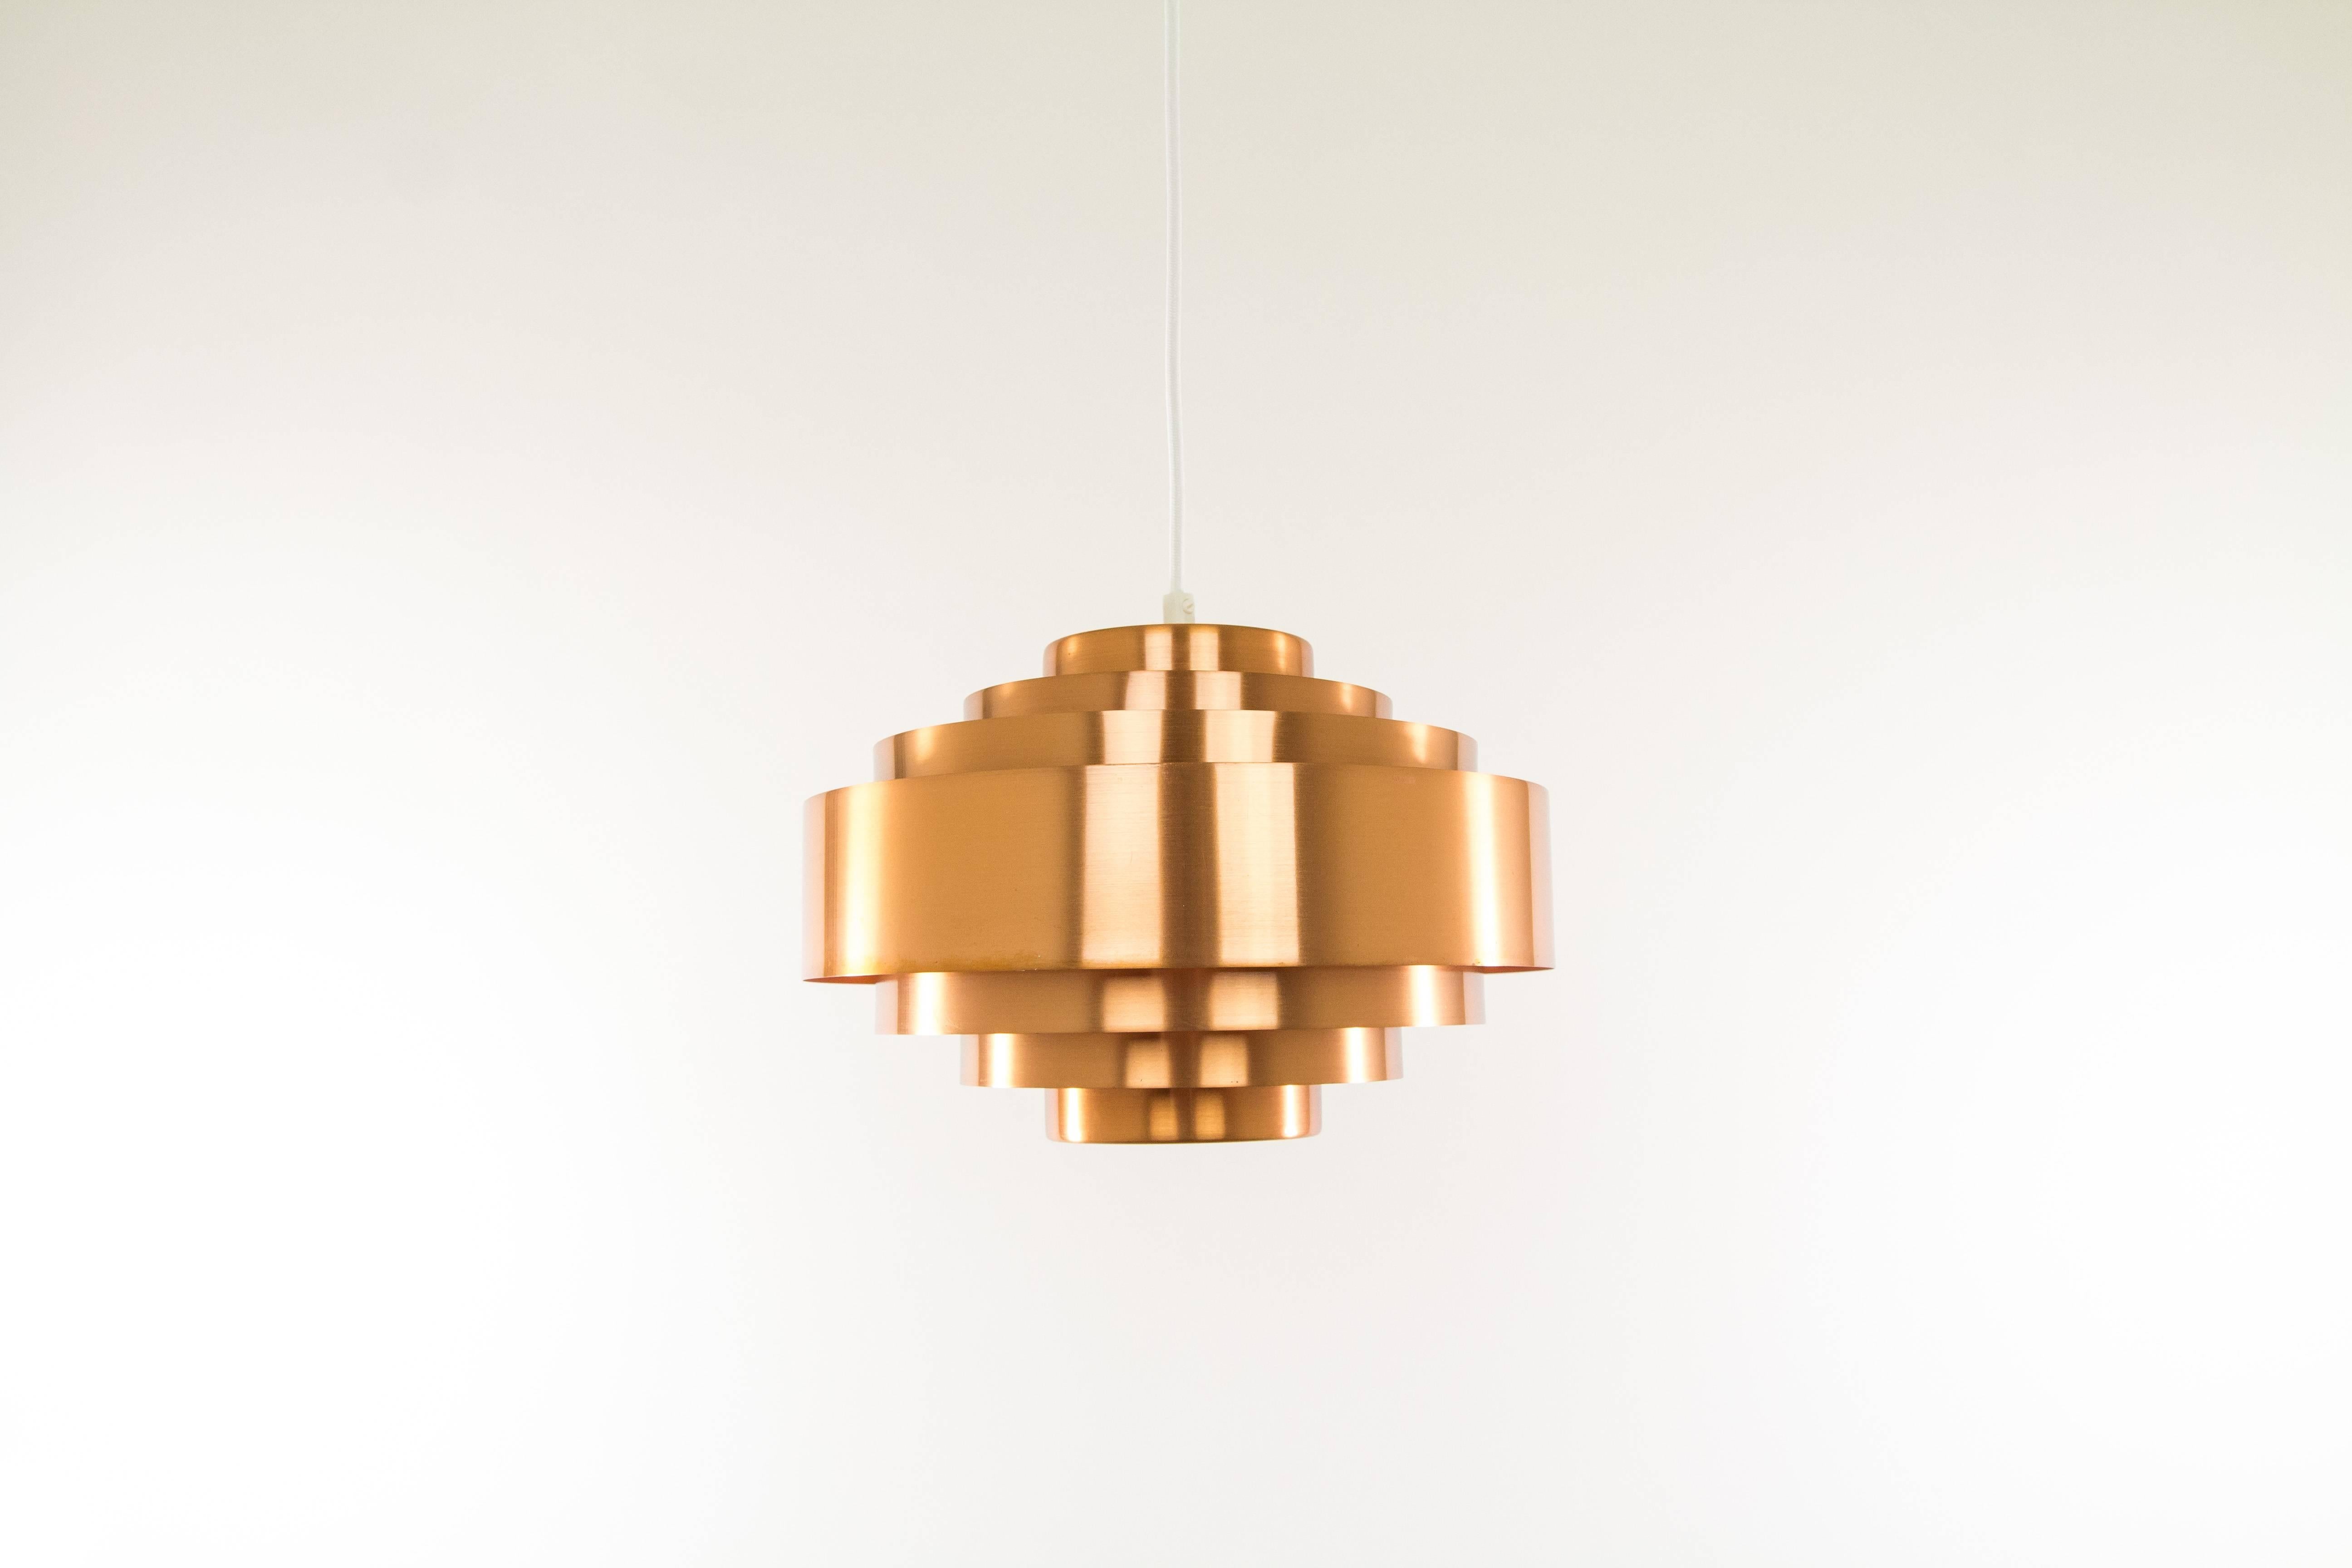 This 'Ultra' pendant was designed by Jo Hammerborg for Fog & Mørup in the very early 1960s.

The lamp consists of seven rings. It is closed towards the top and at the bottom it has a (rare) diffuser that was integrated by Hammerborg to filter and